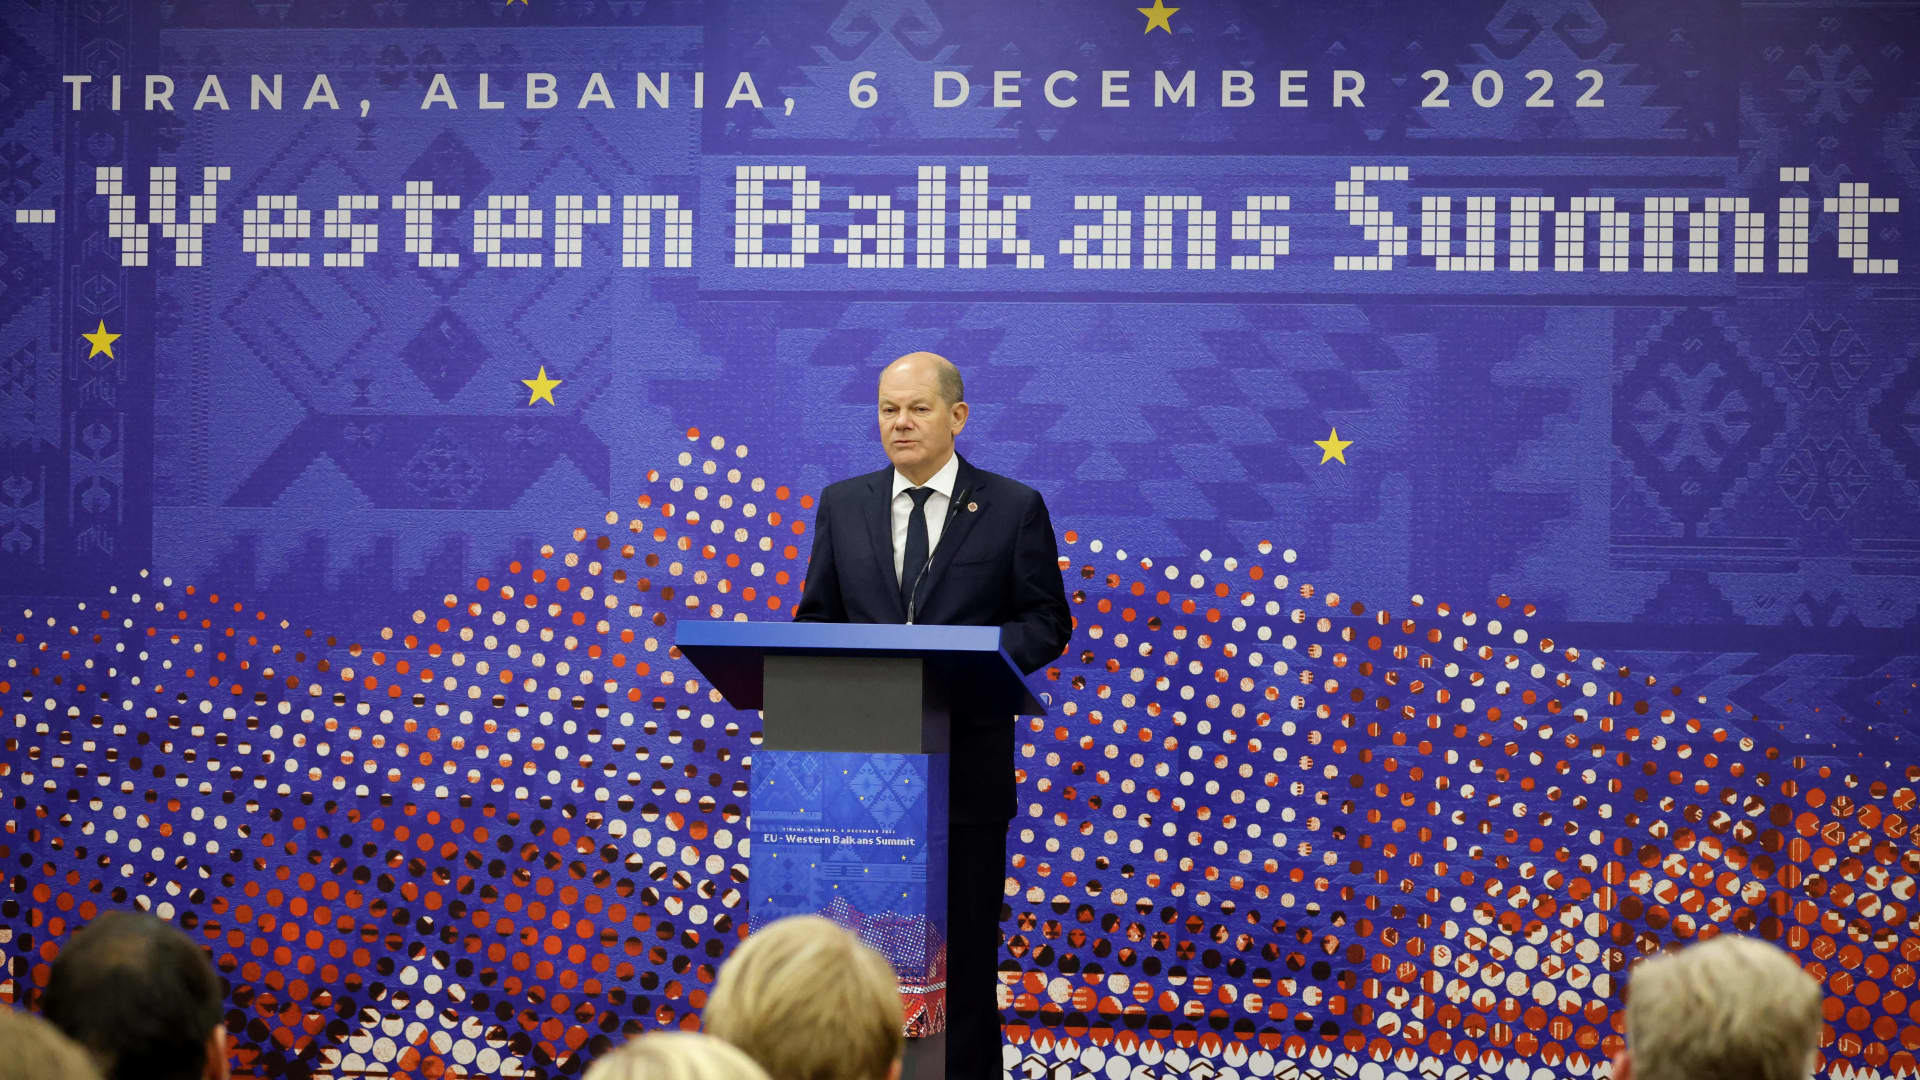 German Chancellor Olaf Scholz addresses journalists during a press conference following the EU Western Balkans summit in Tirana on December 6, 2022.